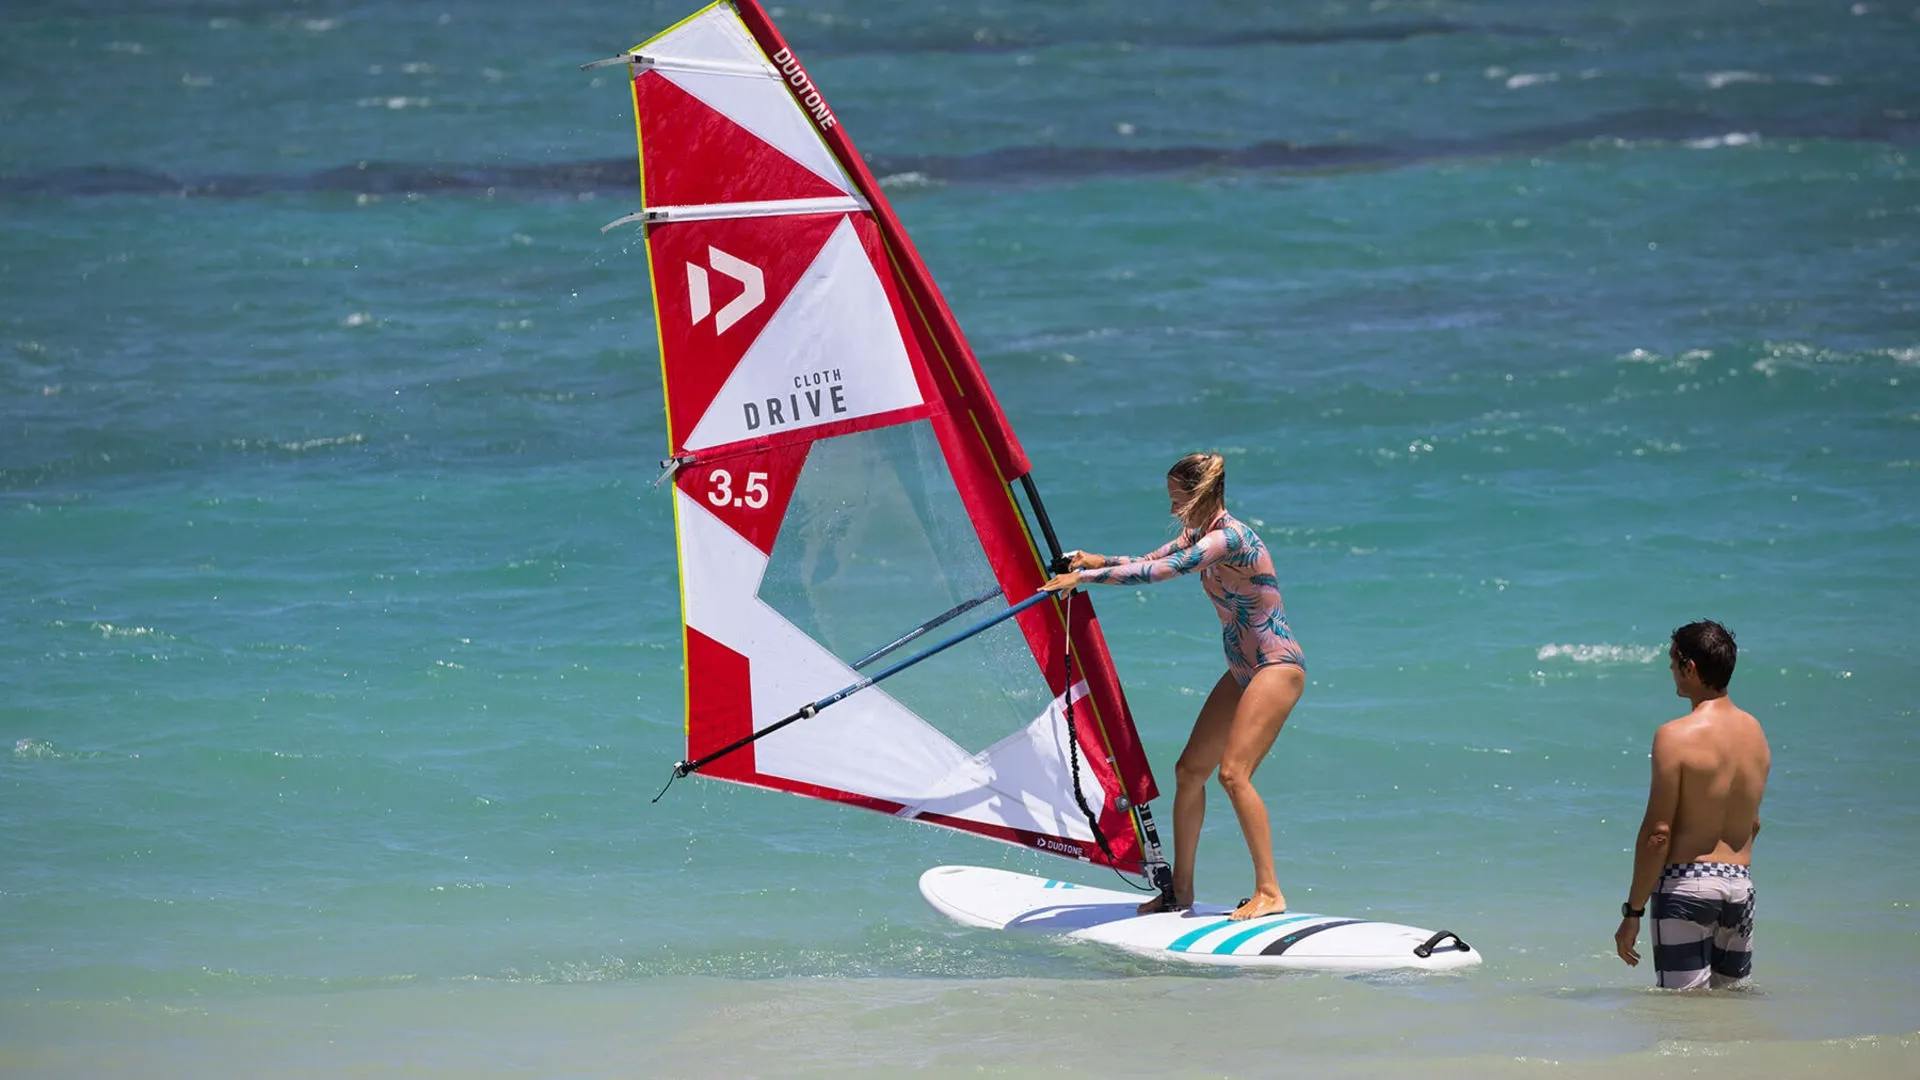 One of the earliest types of windsurfing was called Raceboard